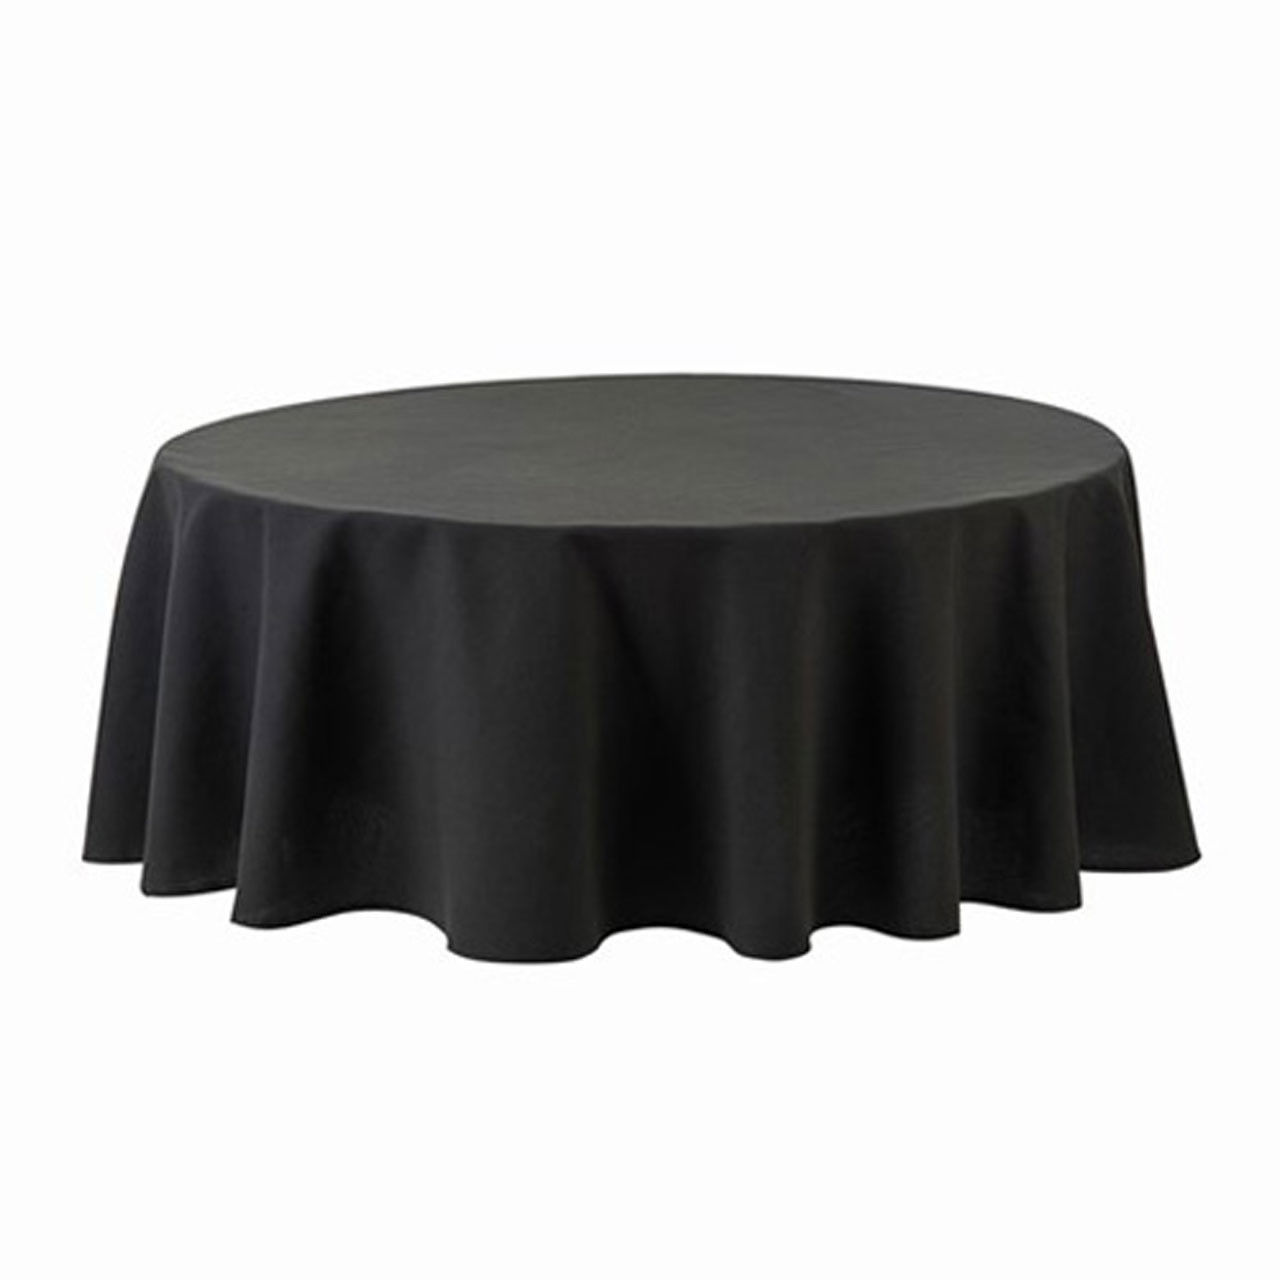 How big is this black round tablecloth?